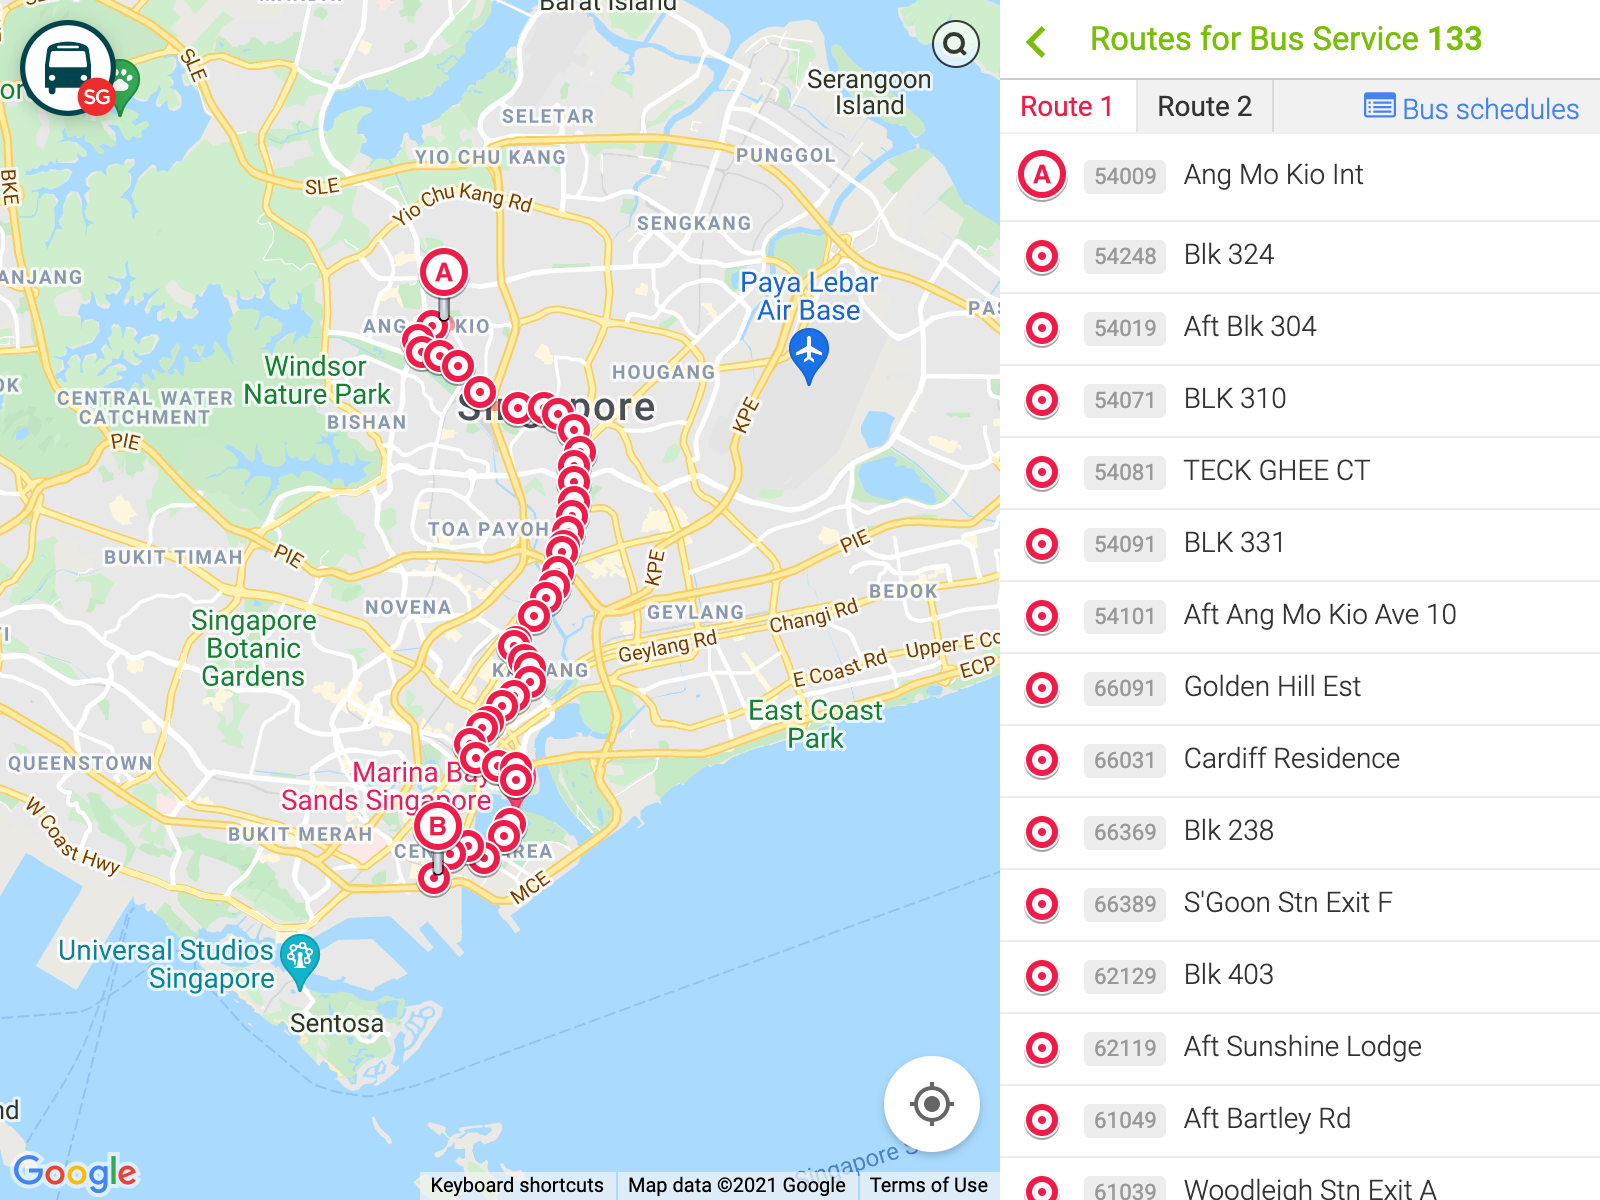 Previous design of BusRouter SG, with map view and list view